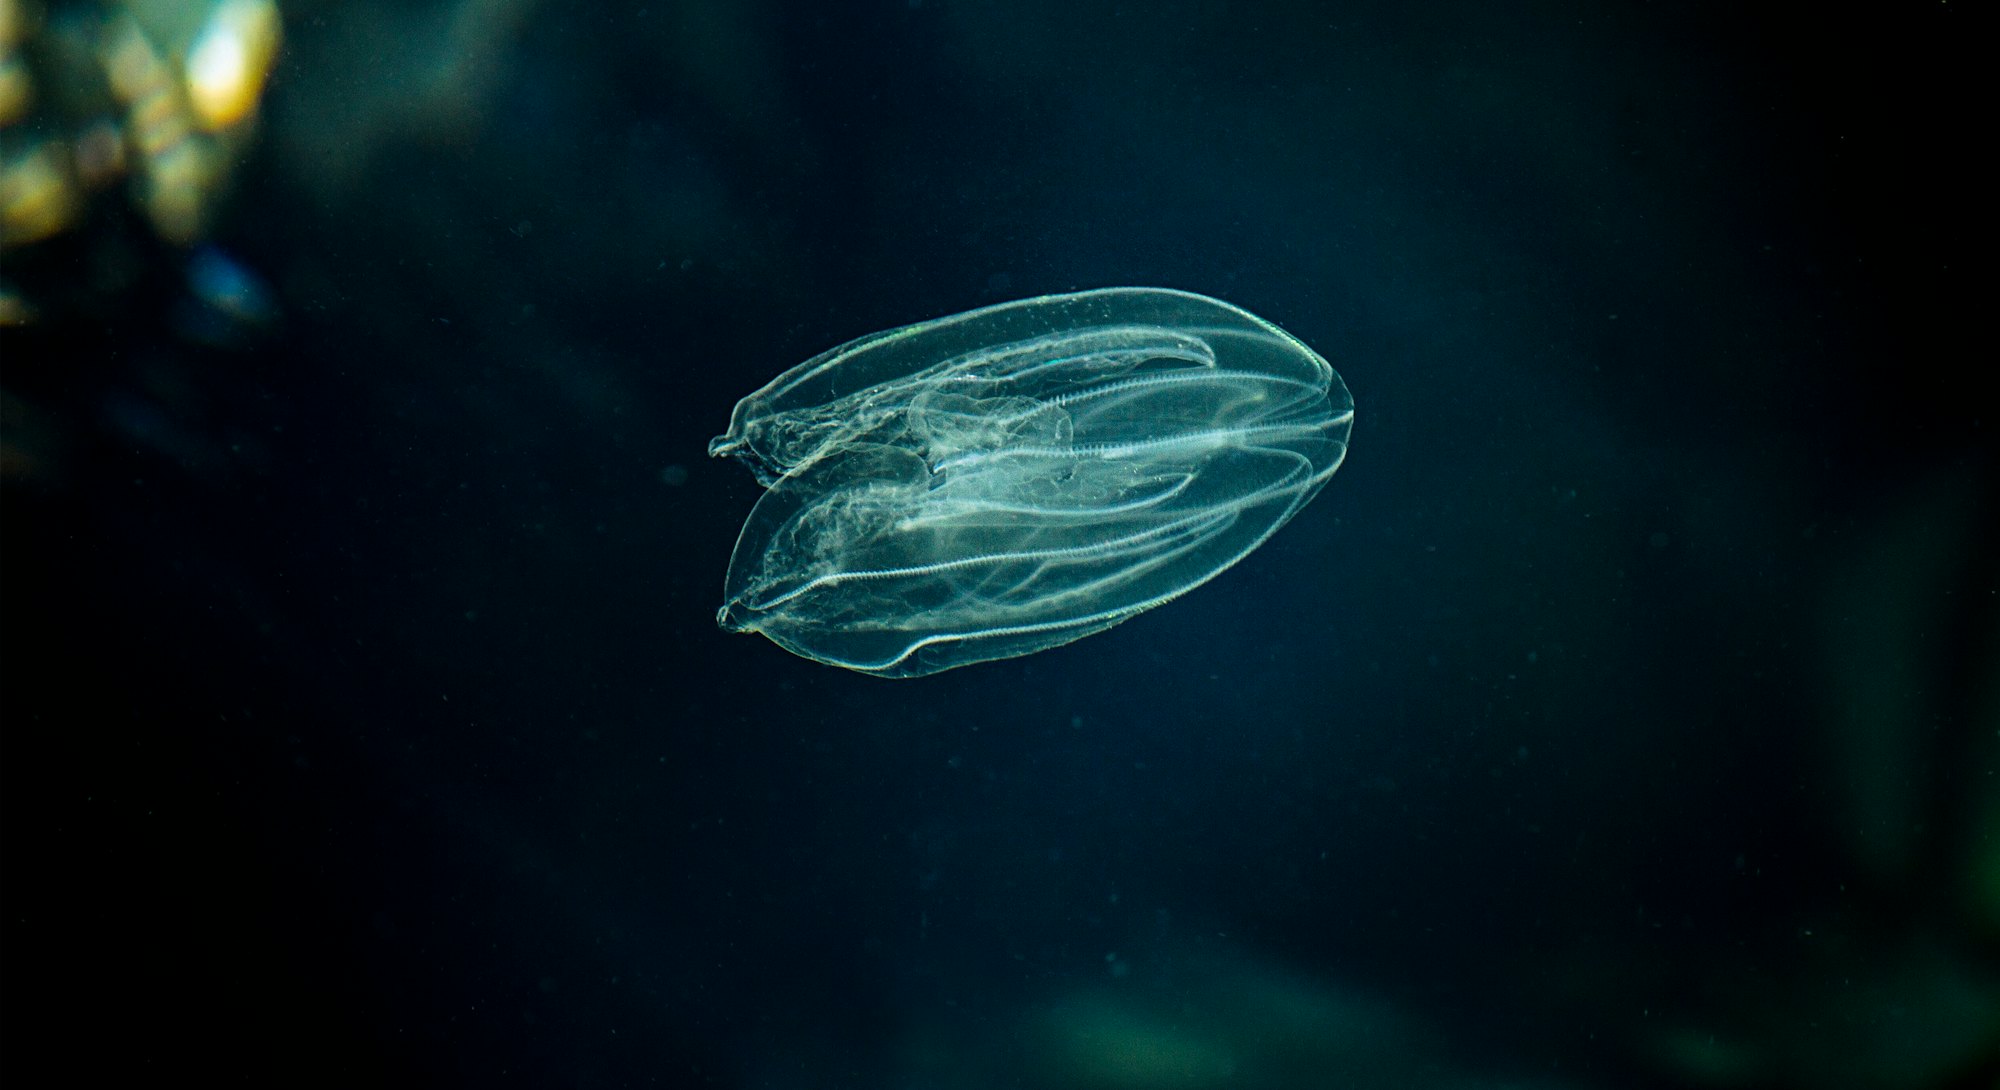 Sea Walnut, American comb jelly, Warty comb jelly or Leidy's comb jelly (Mnemiopsis leidyi). Adriati...